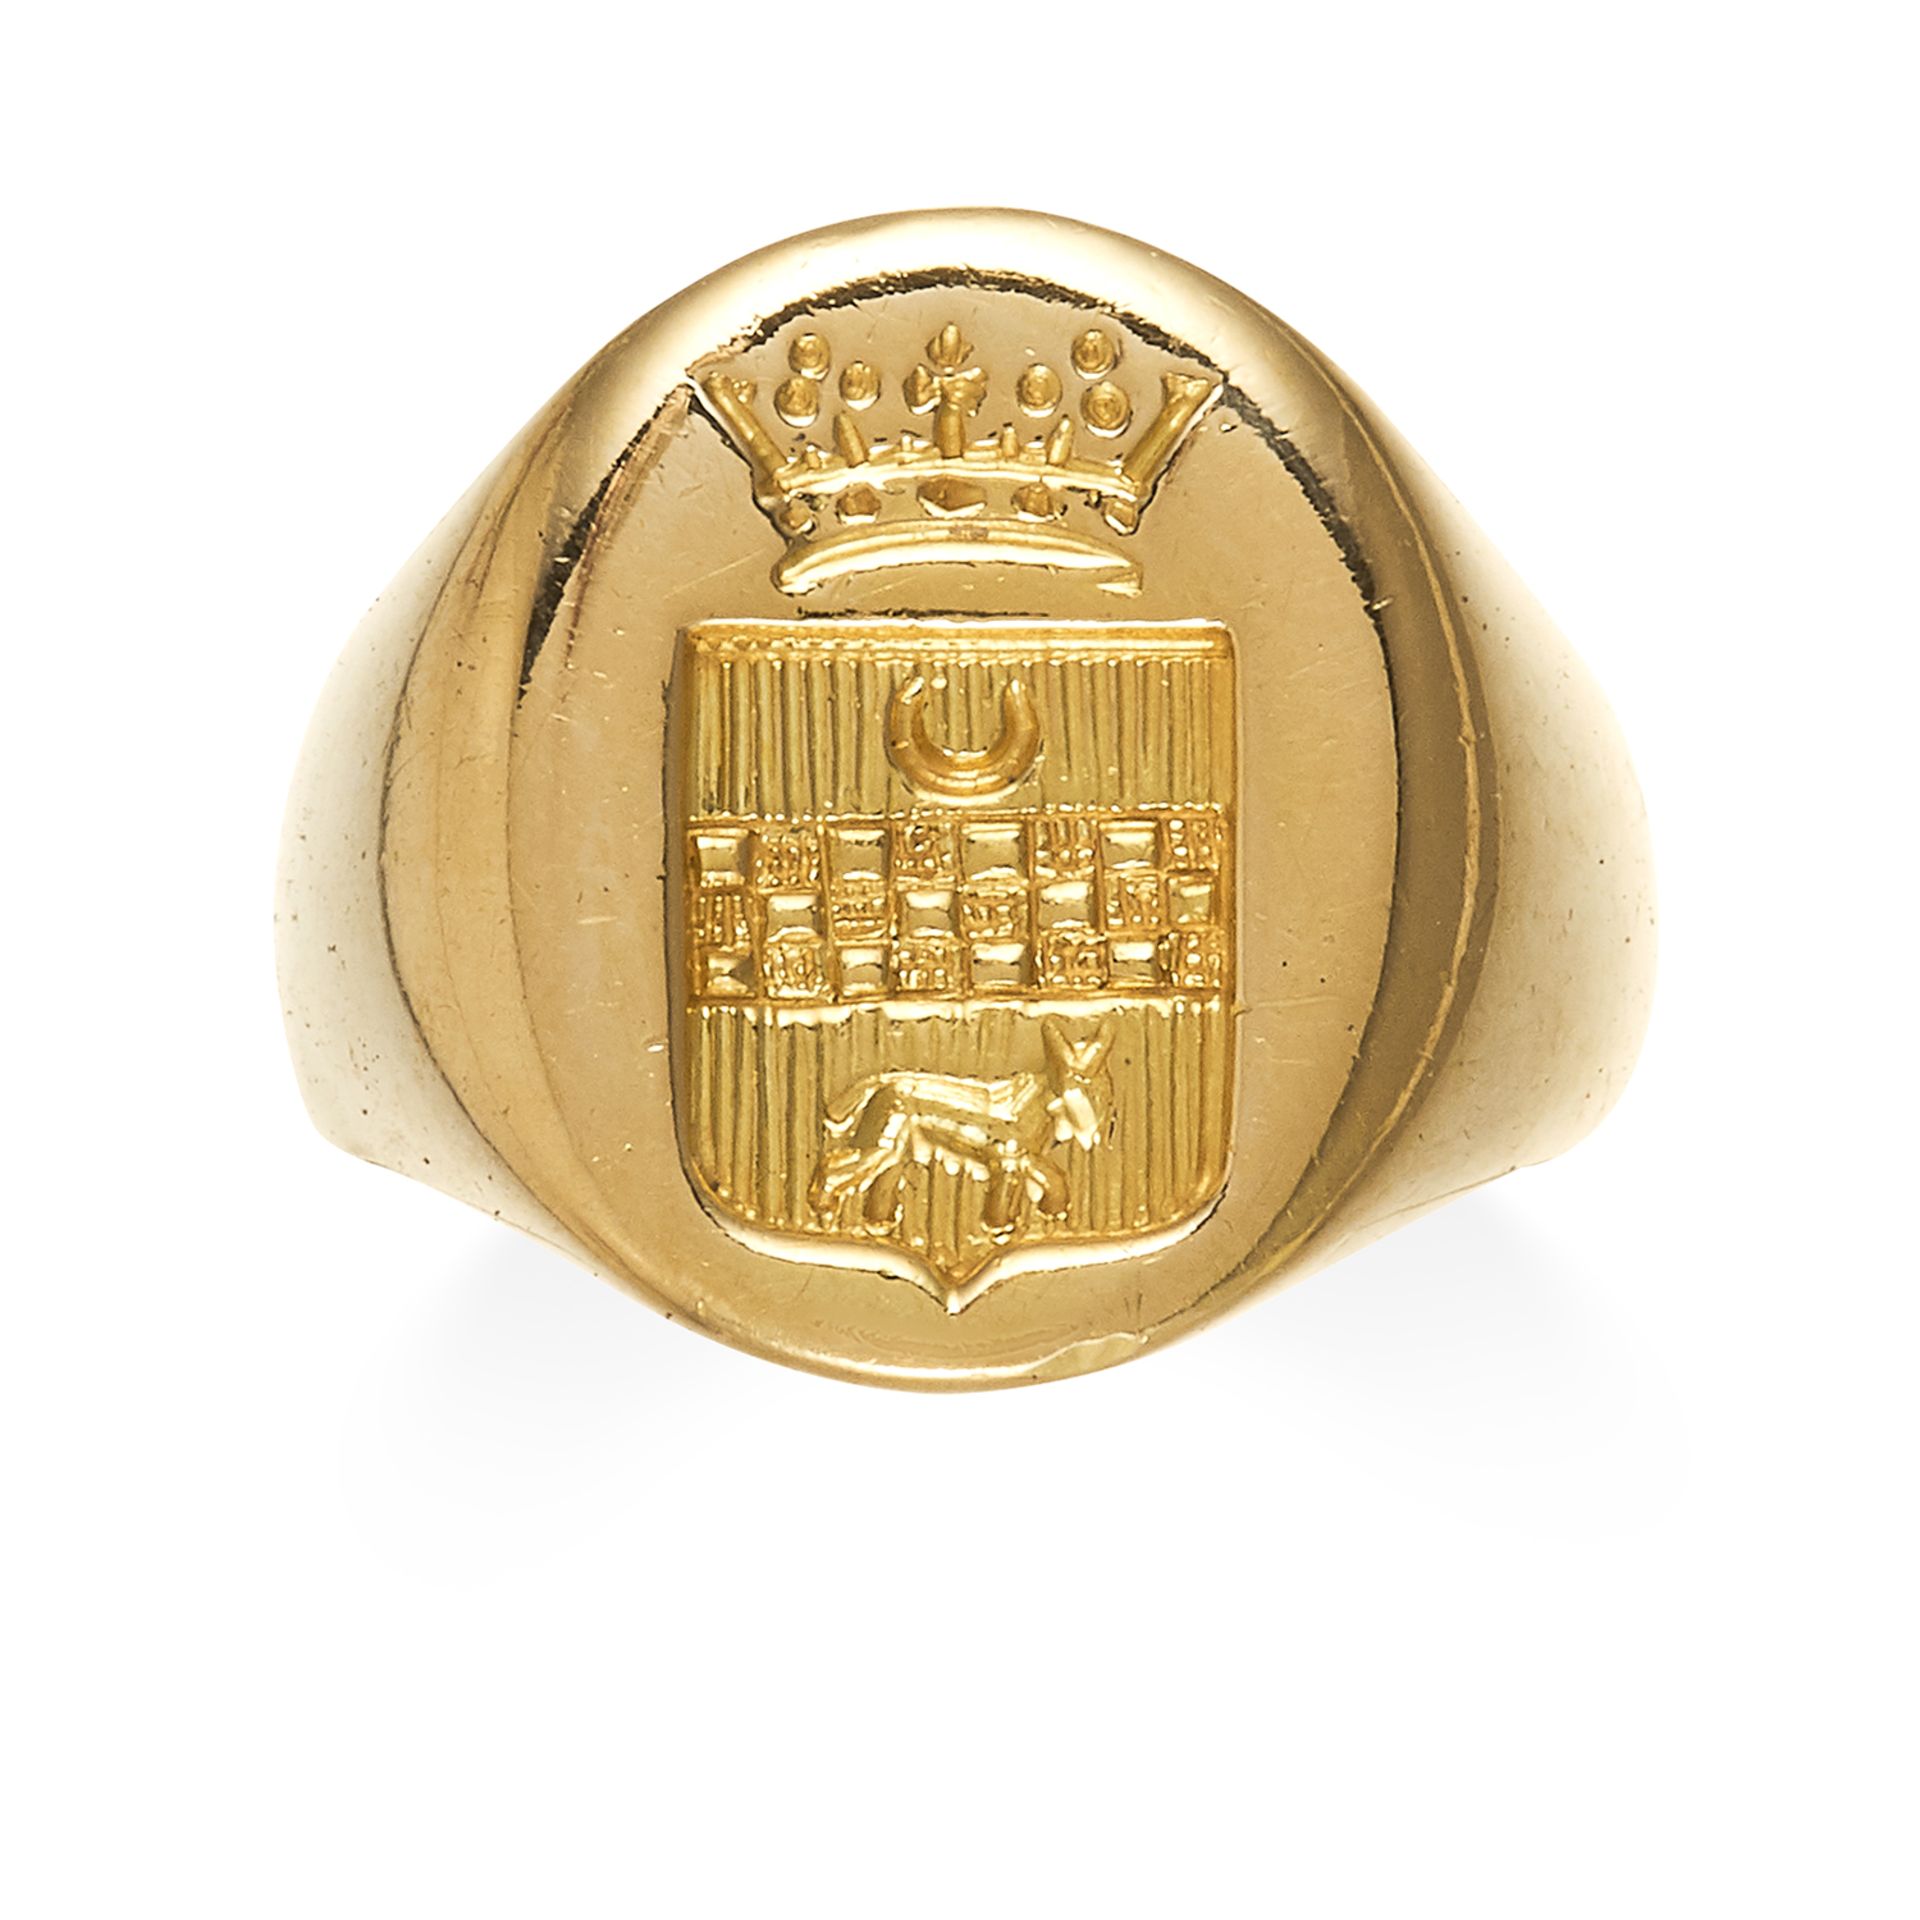 AN INTAGLIO SEAL SIGNET RING in high carat yellow gold, the oval face with a reverse engraved coat